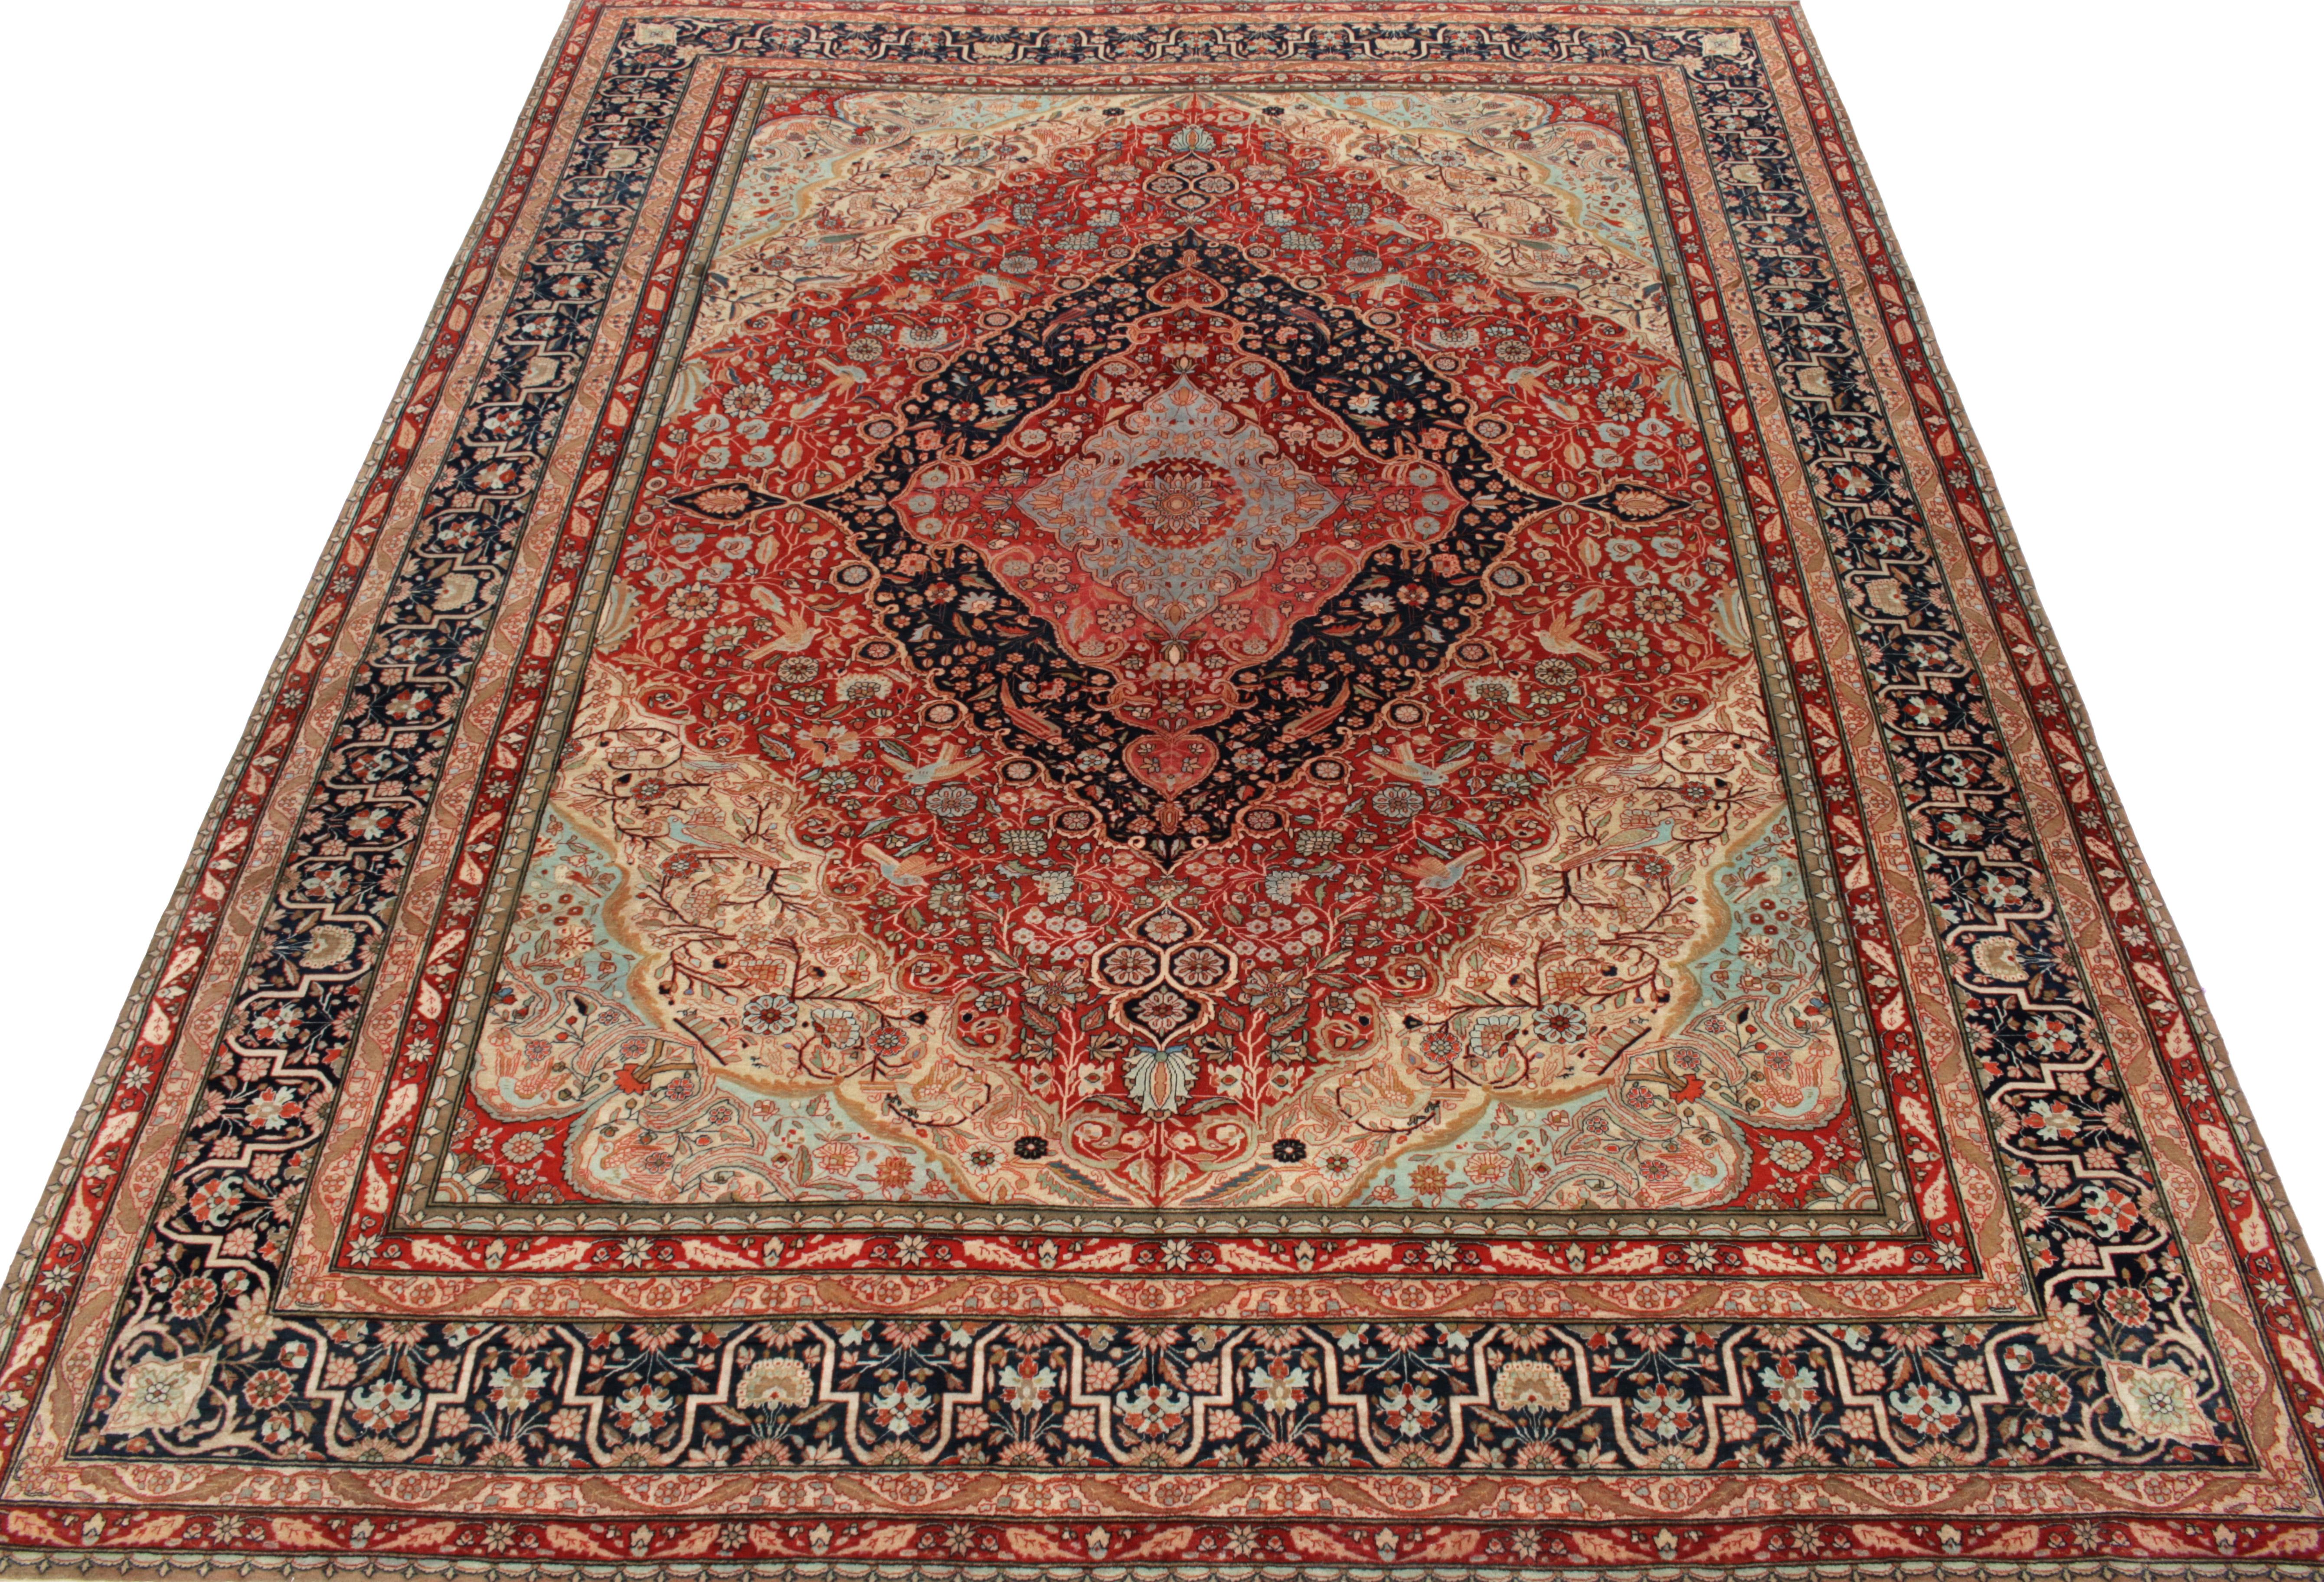 Hand-knotted in wool circa 1890,1900, one of the finest antique Mohtashem Kashan rugs our principal has seen join our Antique & Vintage Persian rugs. A collectible, versatile 9 x 11 in pristine condition, rich red and blue with beige-brown depict a